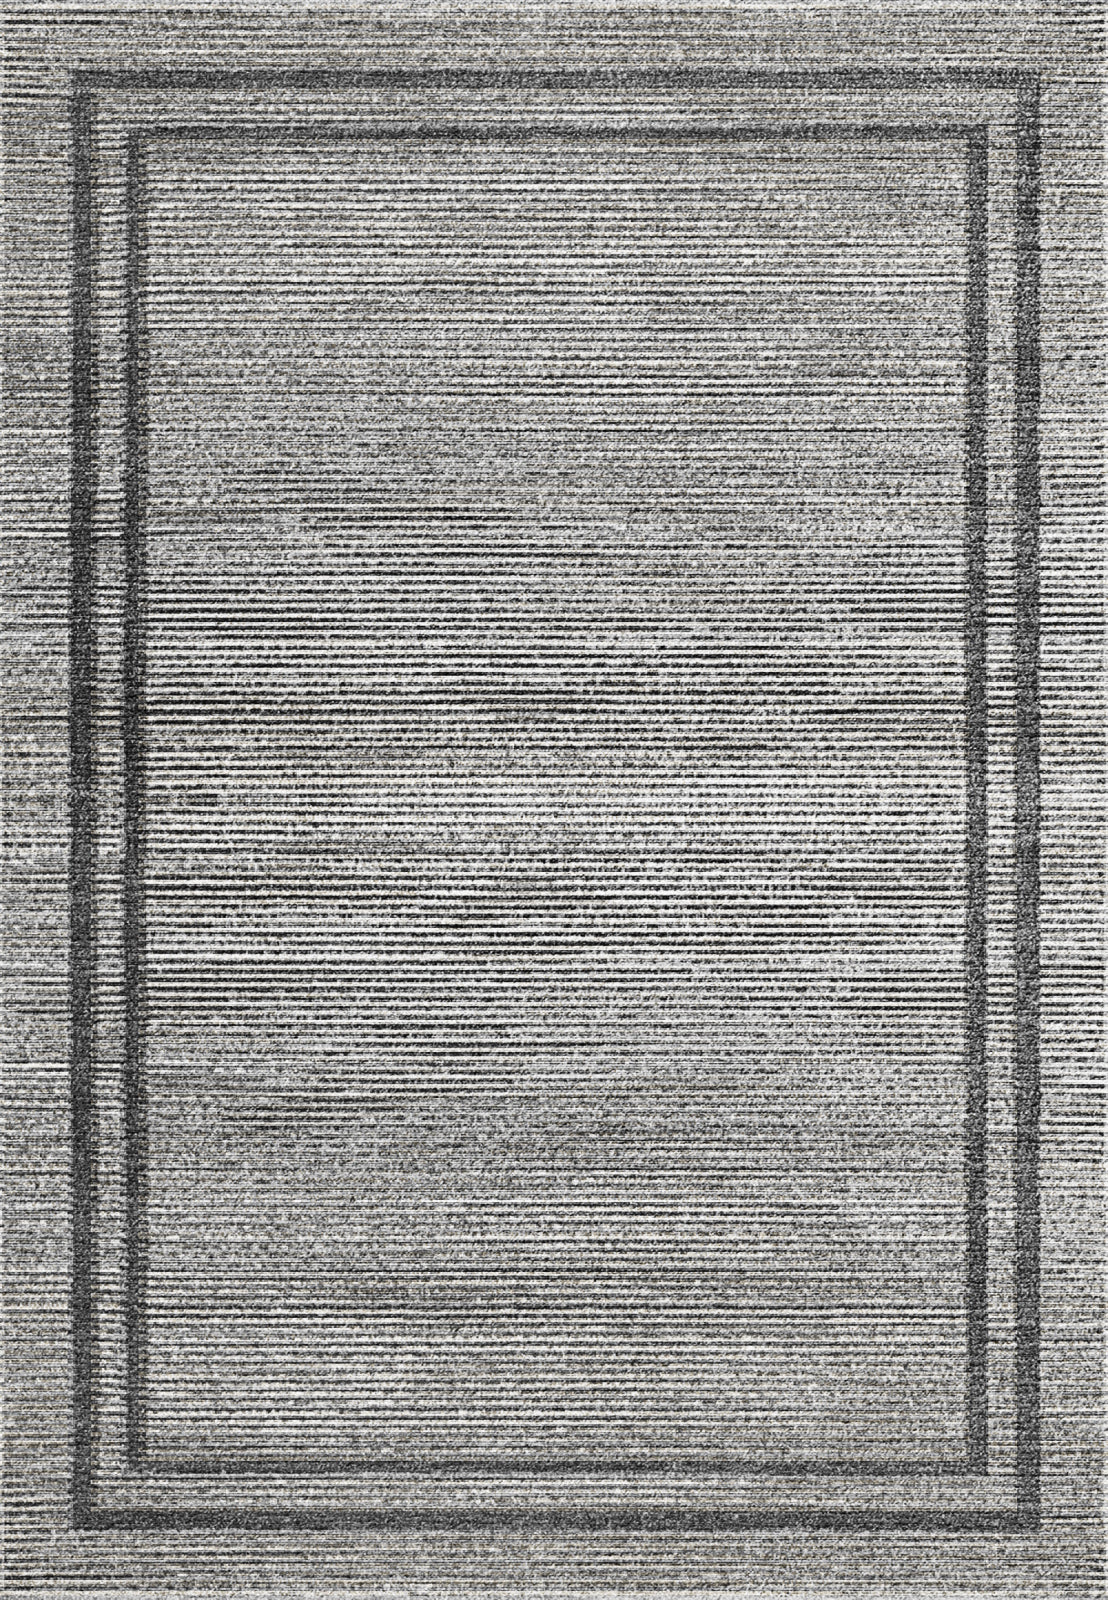 Dynamic Rugs Robin 1150 Beige/Taupe/Charcoal Area Rug